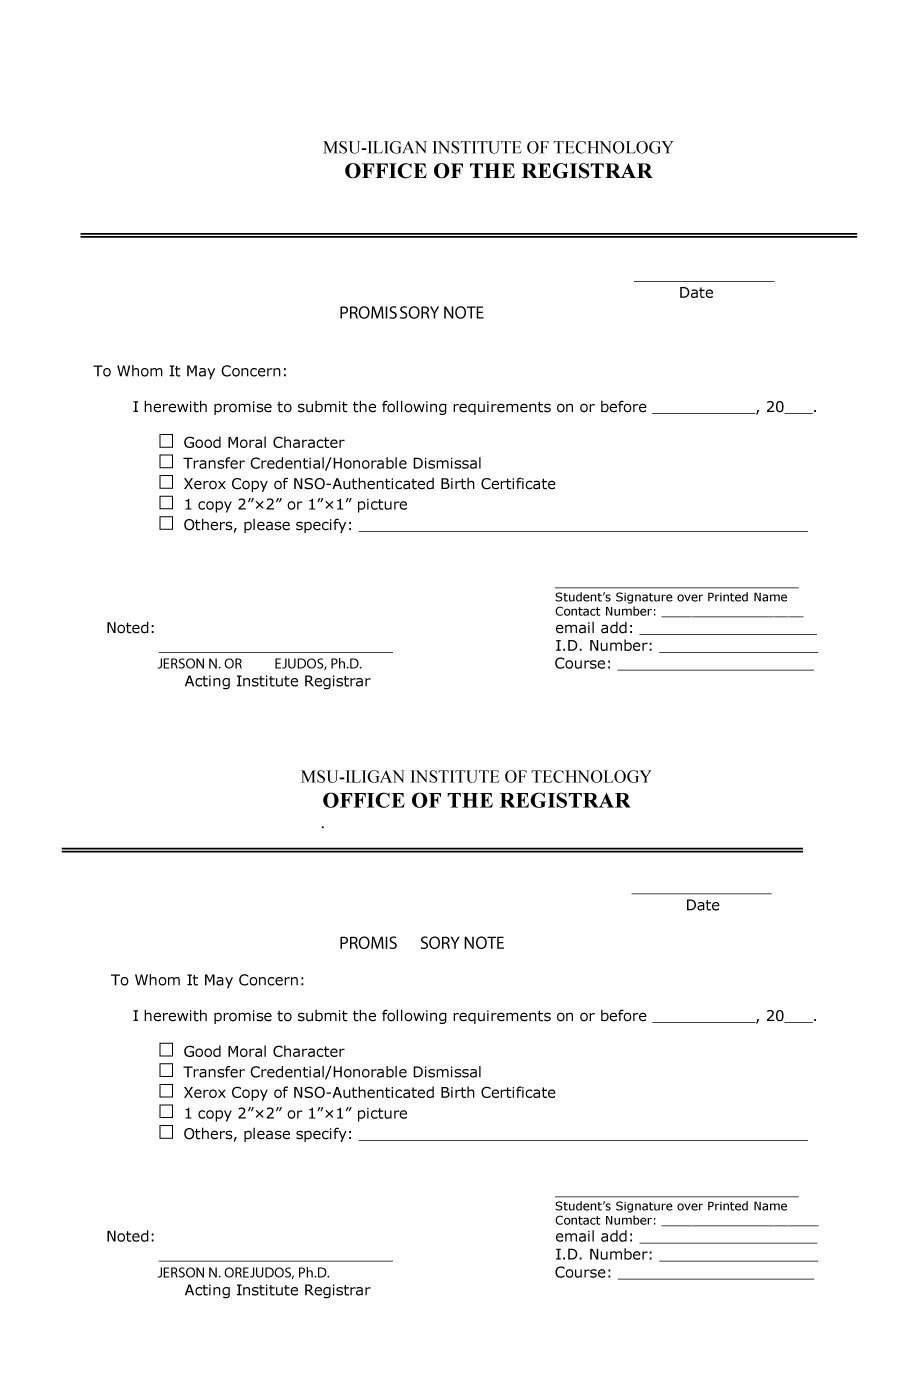 45 Free Promissory Note Templates & Forms [Word & Pdf] ᐅ For Legal File Note Template